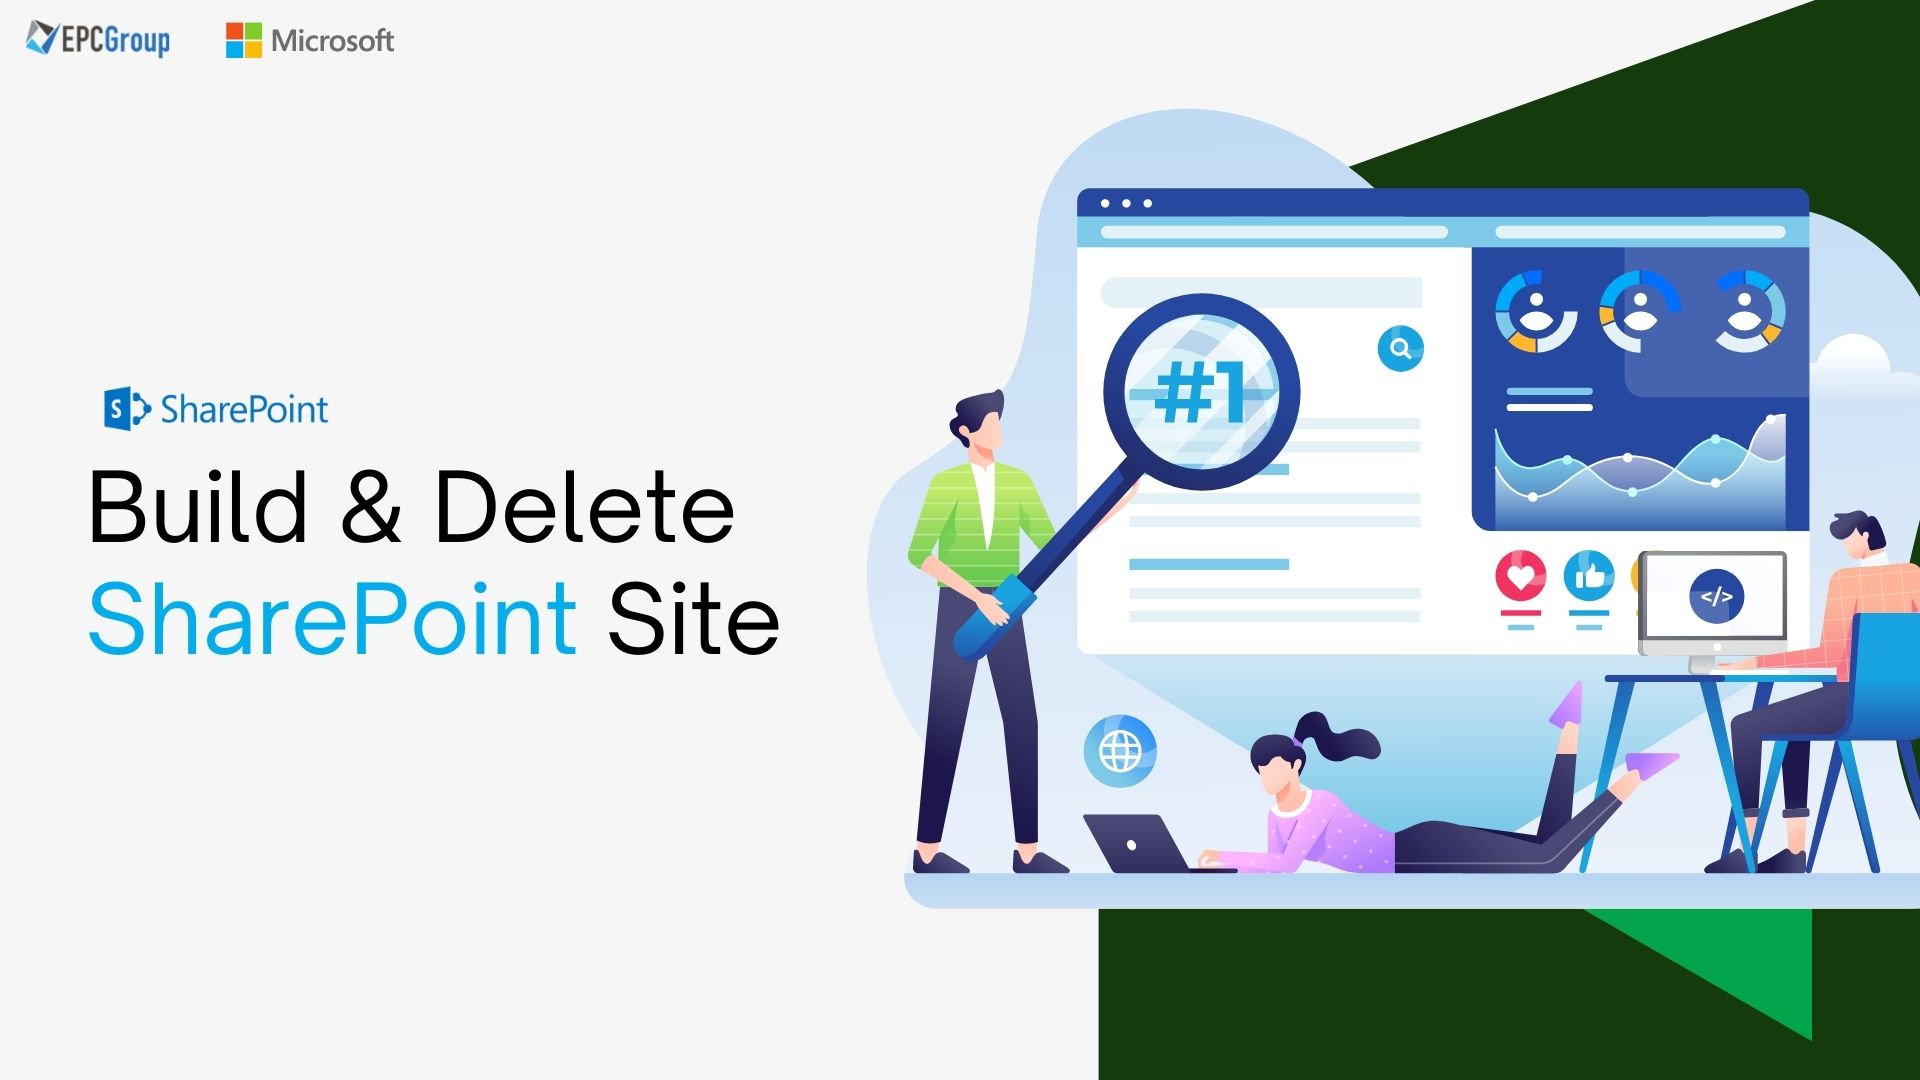 How to Build and Delete a Site in SharePoint - thumb image